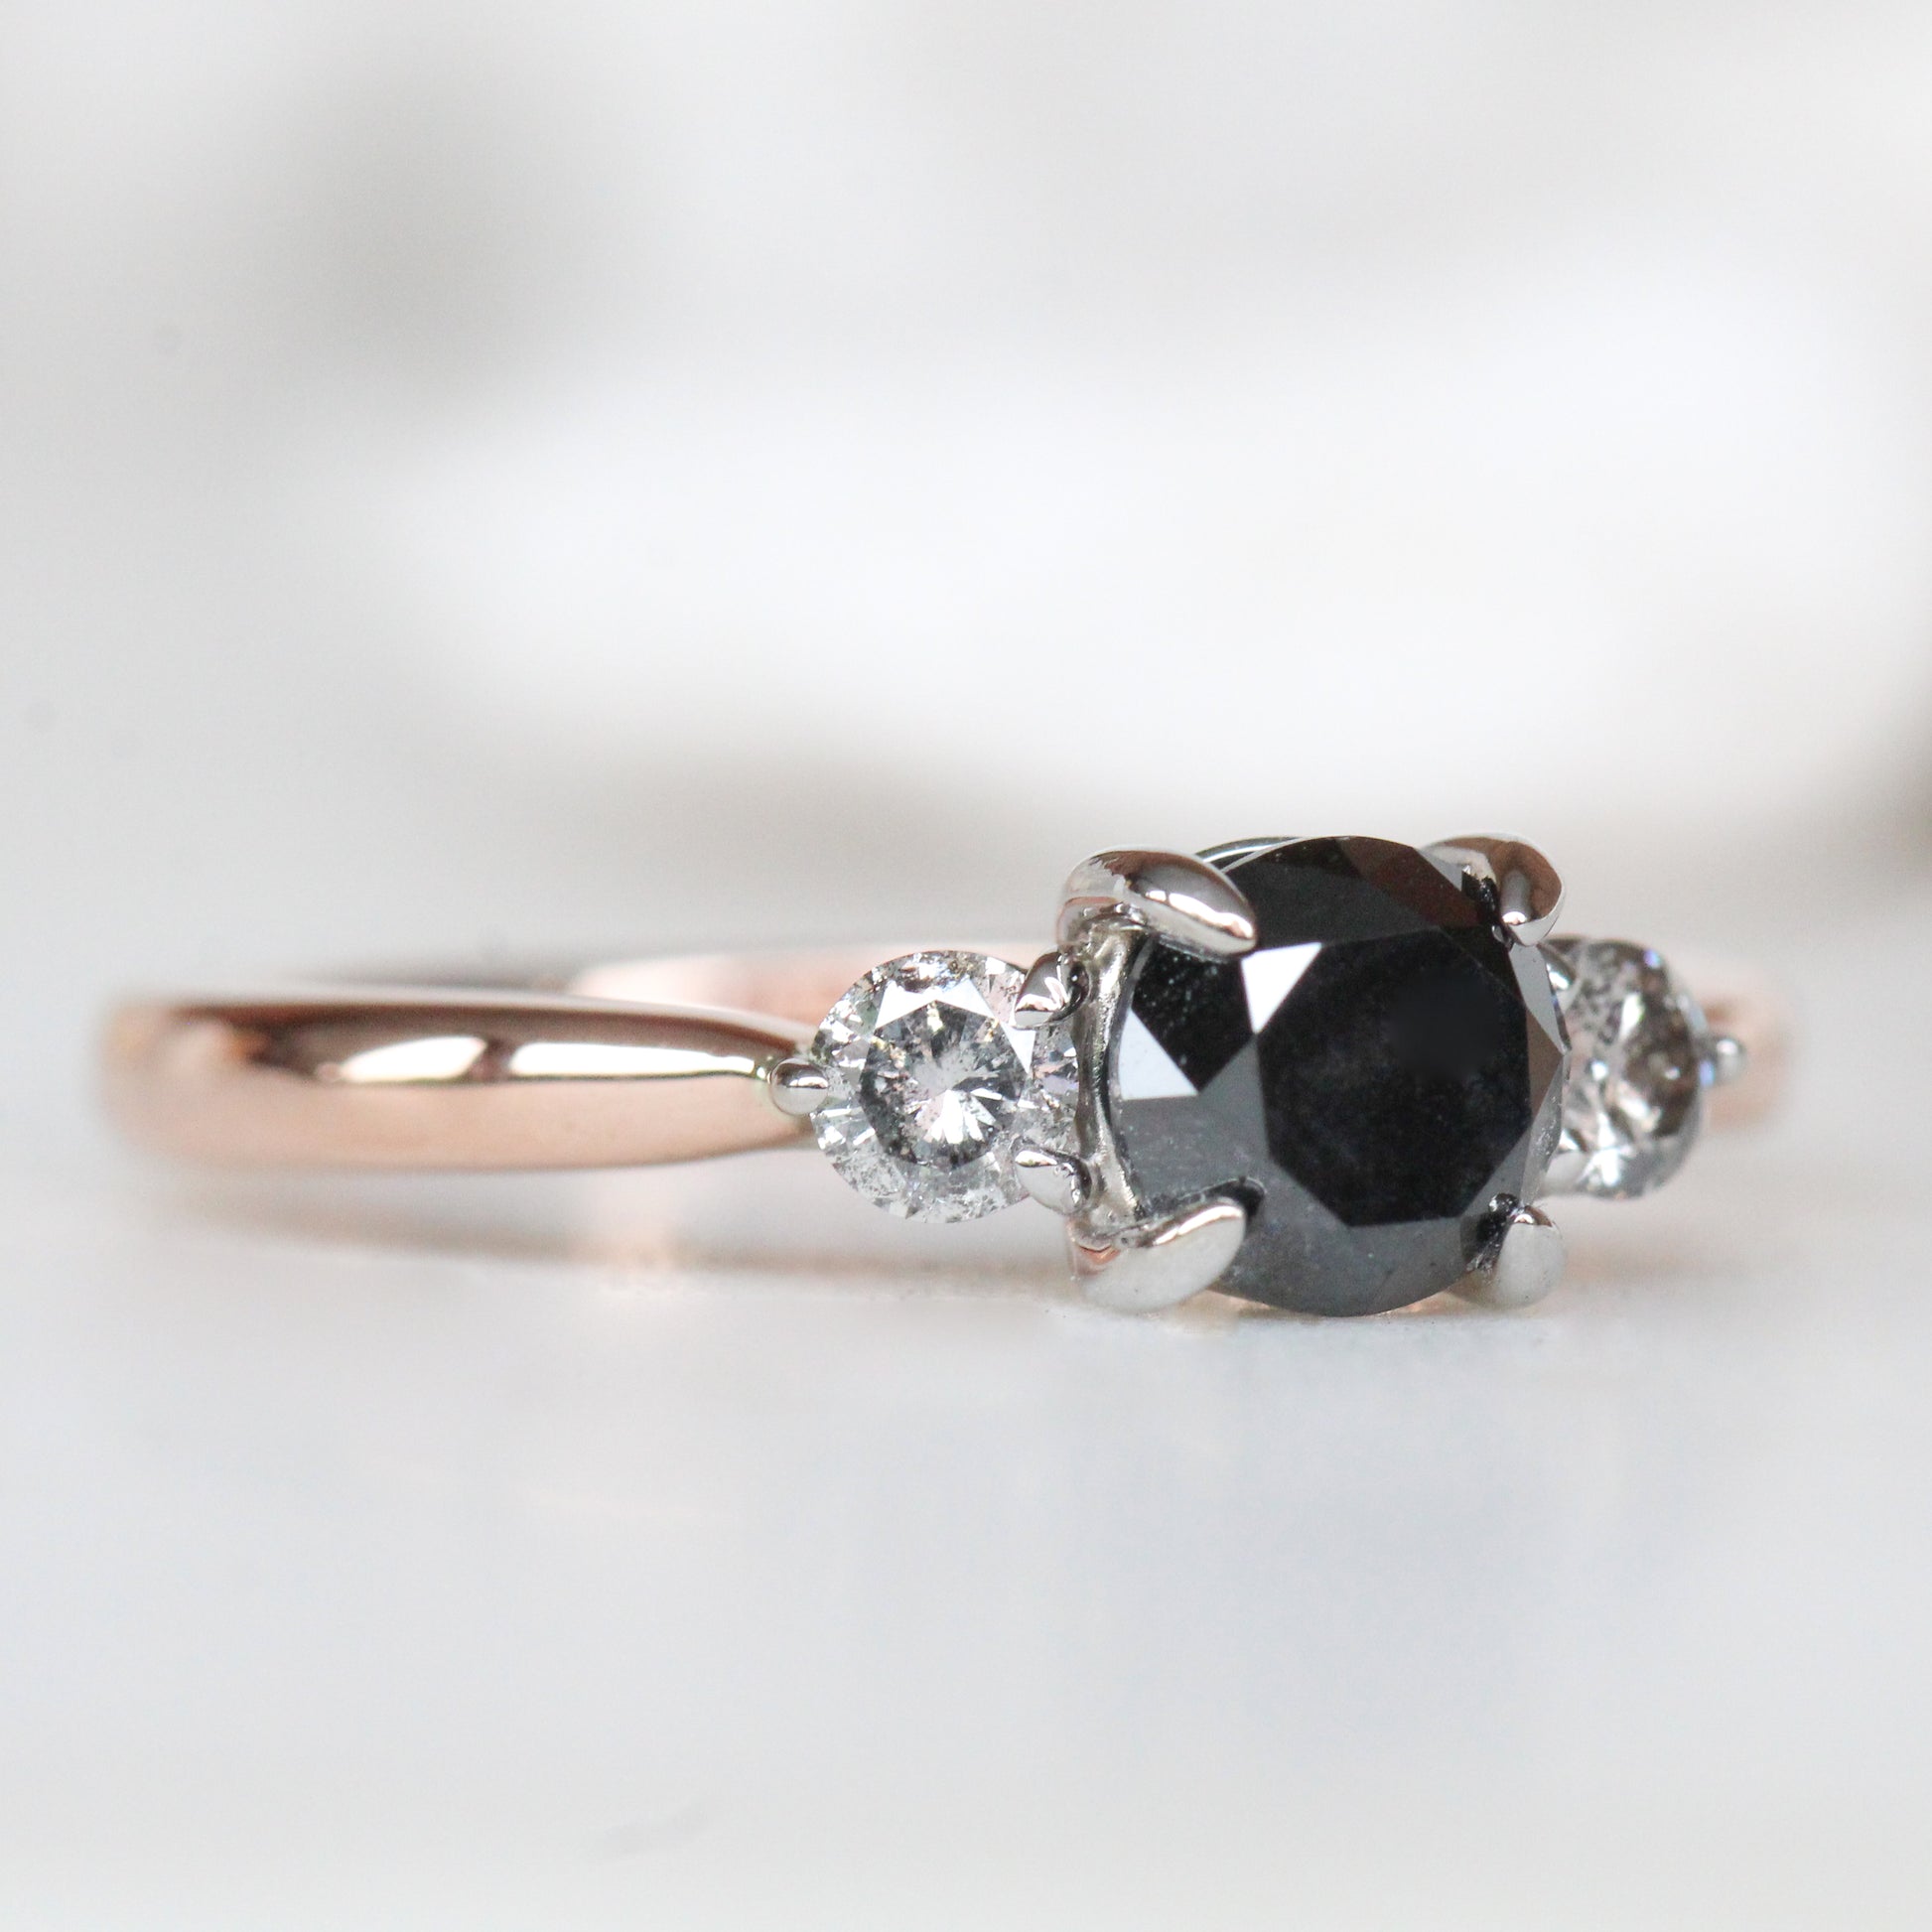 CAELEN - Terra Ring with Carat Black Diamond and White Diamond Accents in 14k Rose Gold - Ready to Size and Ship - Midwinter Co. Alternative Bridal Rings and Modern Fine Jewelry